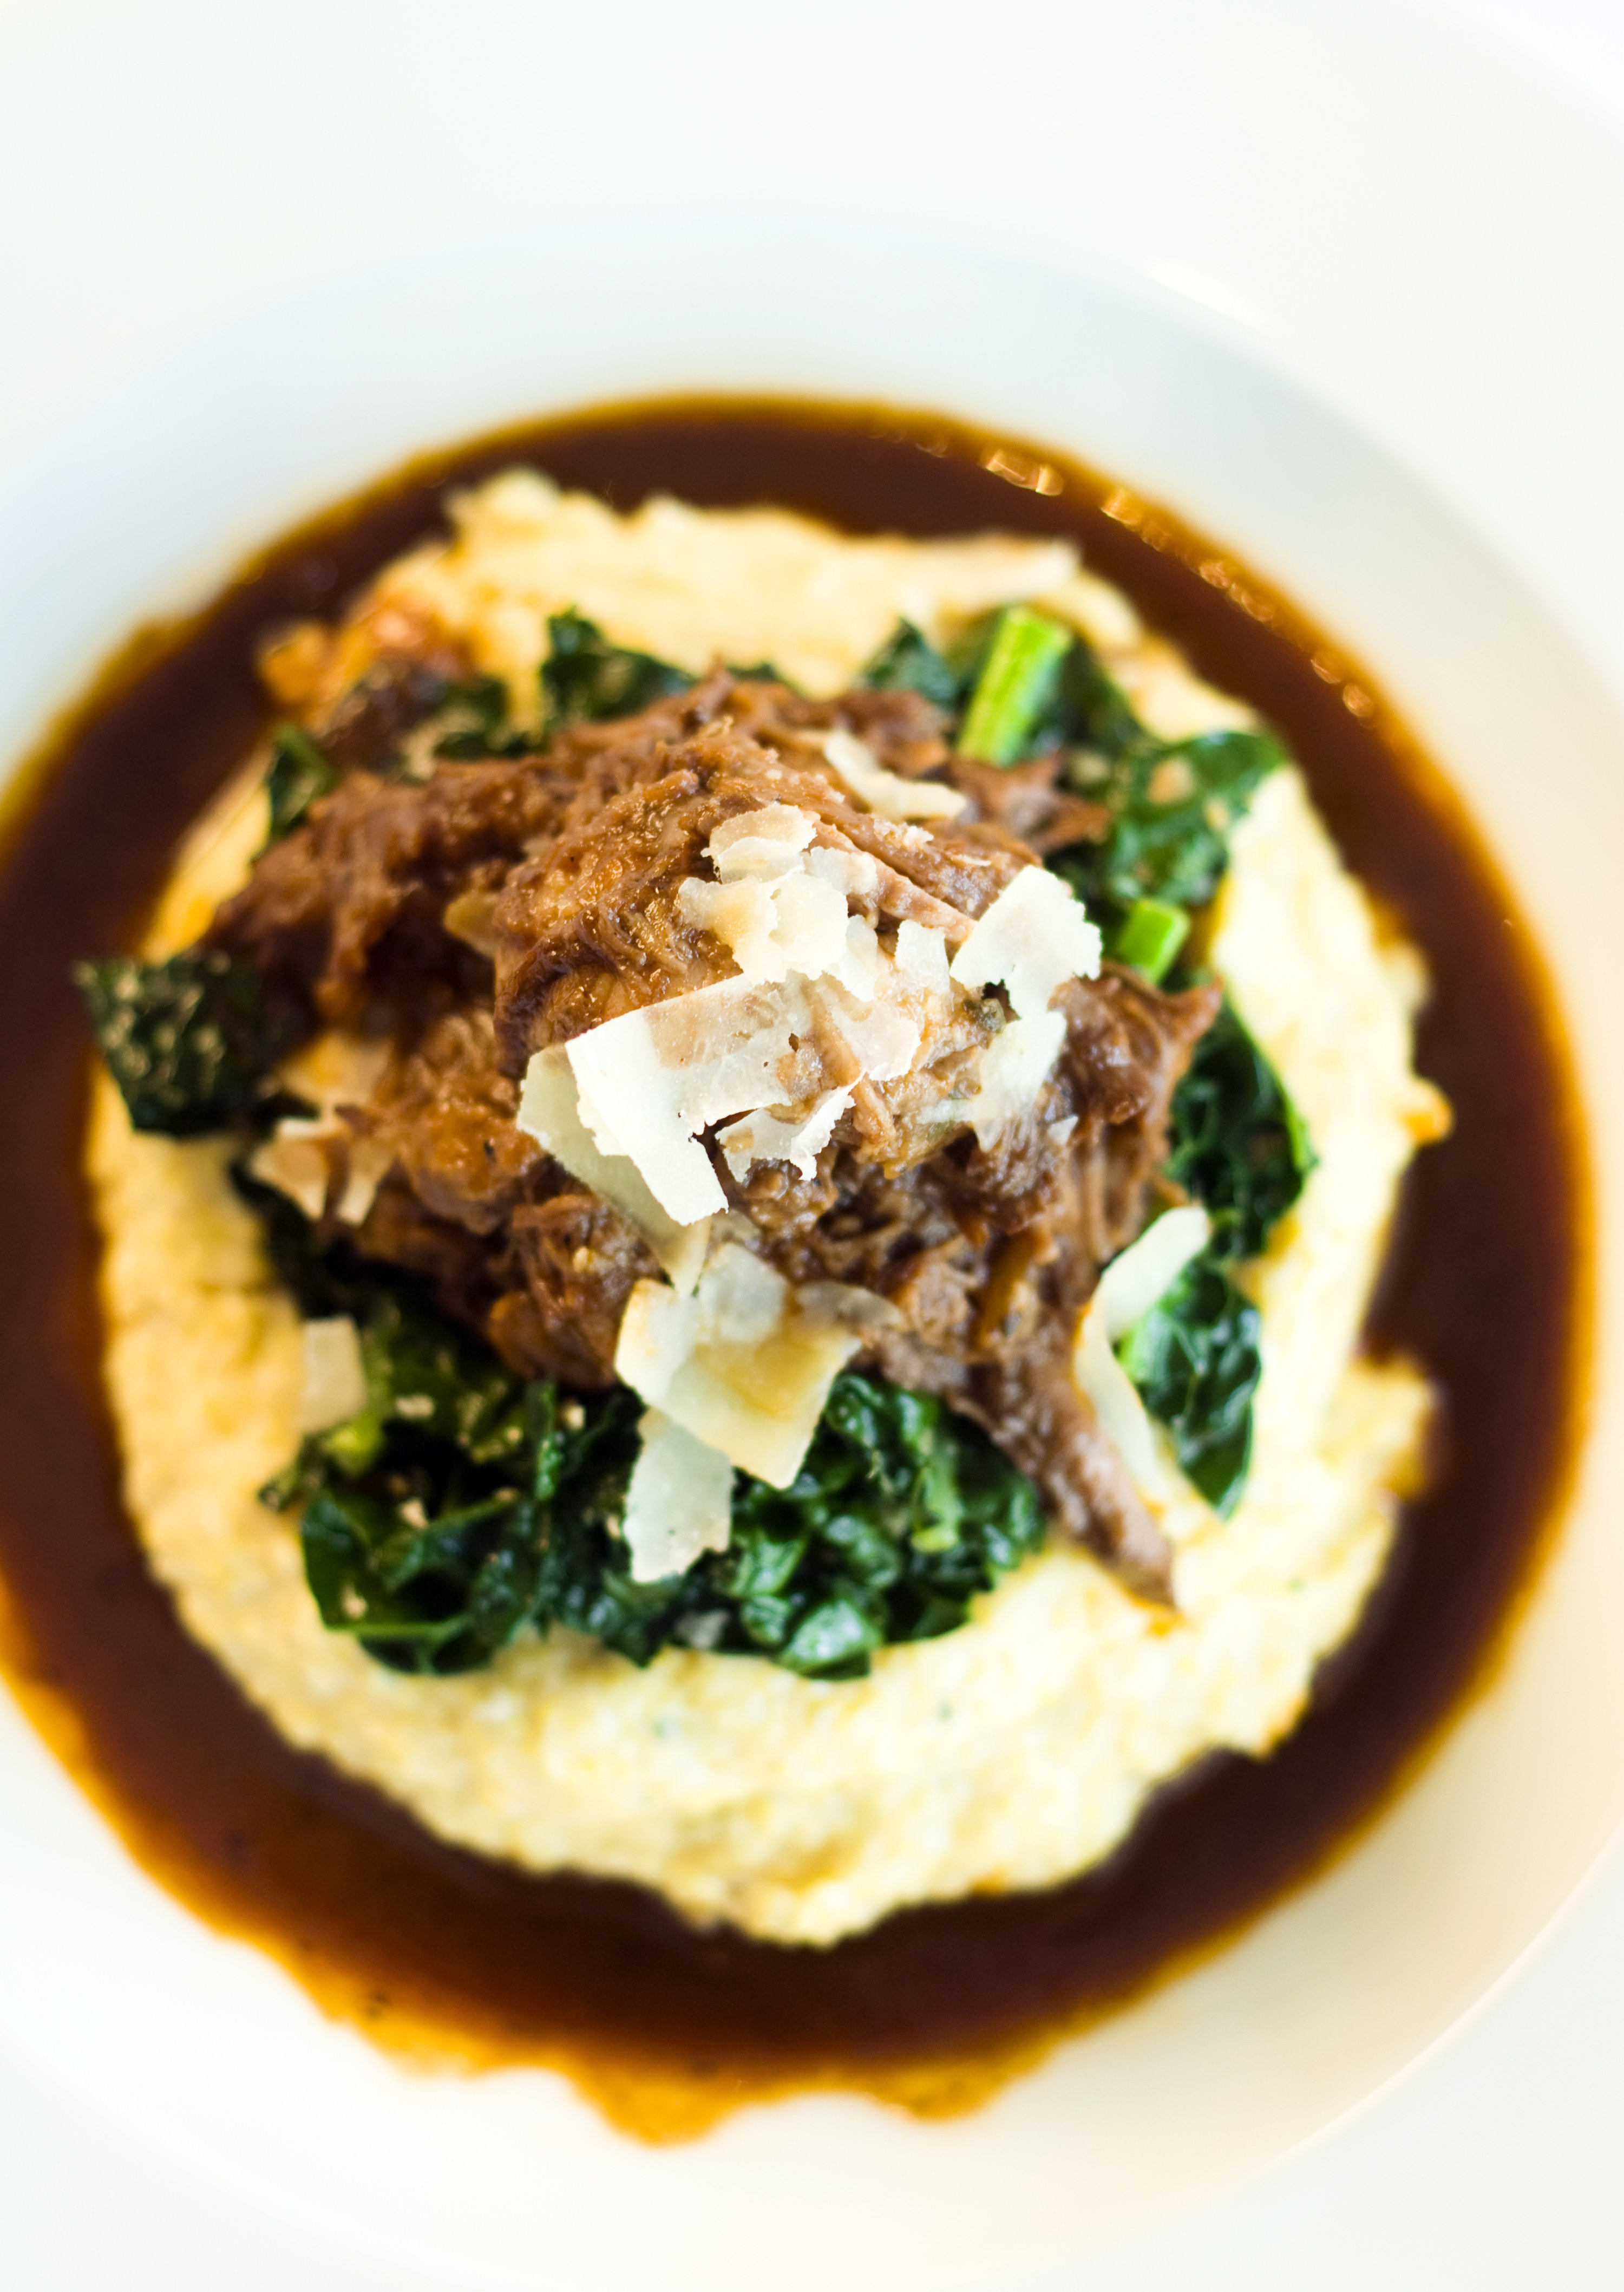 shredded beef over greens and mashed potatoes with a red wine sauce around them